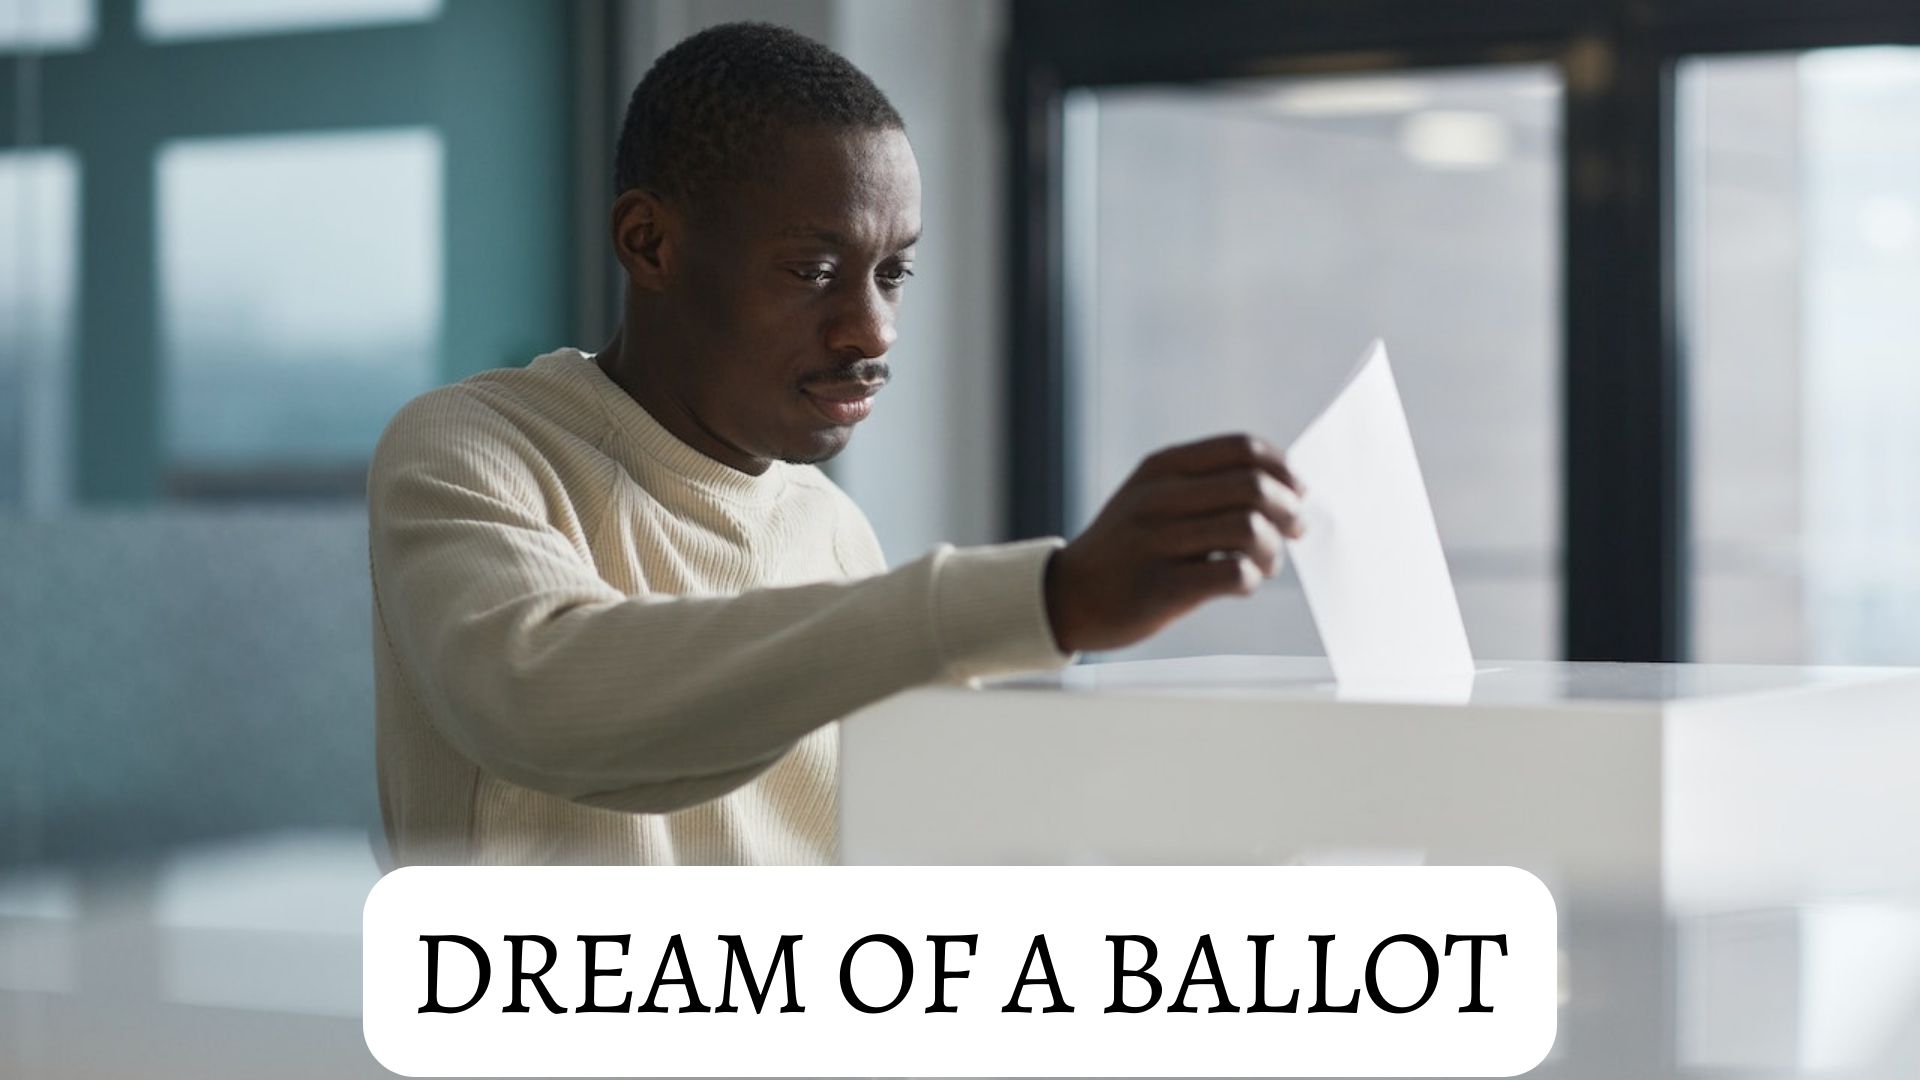 Dream Of A Ballot - Uncertainty Around A Very Specific Issue